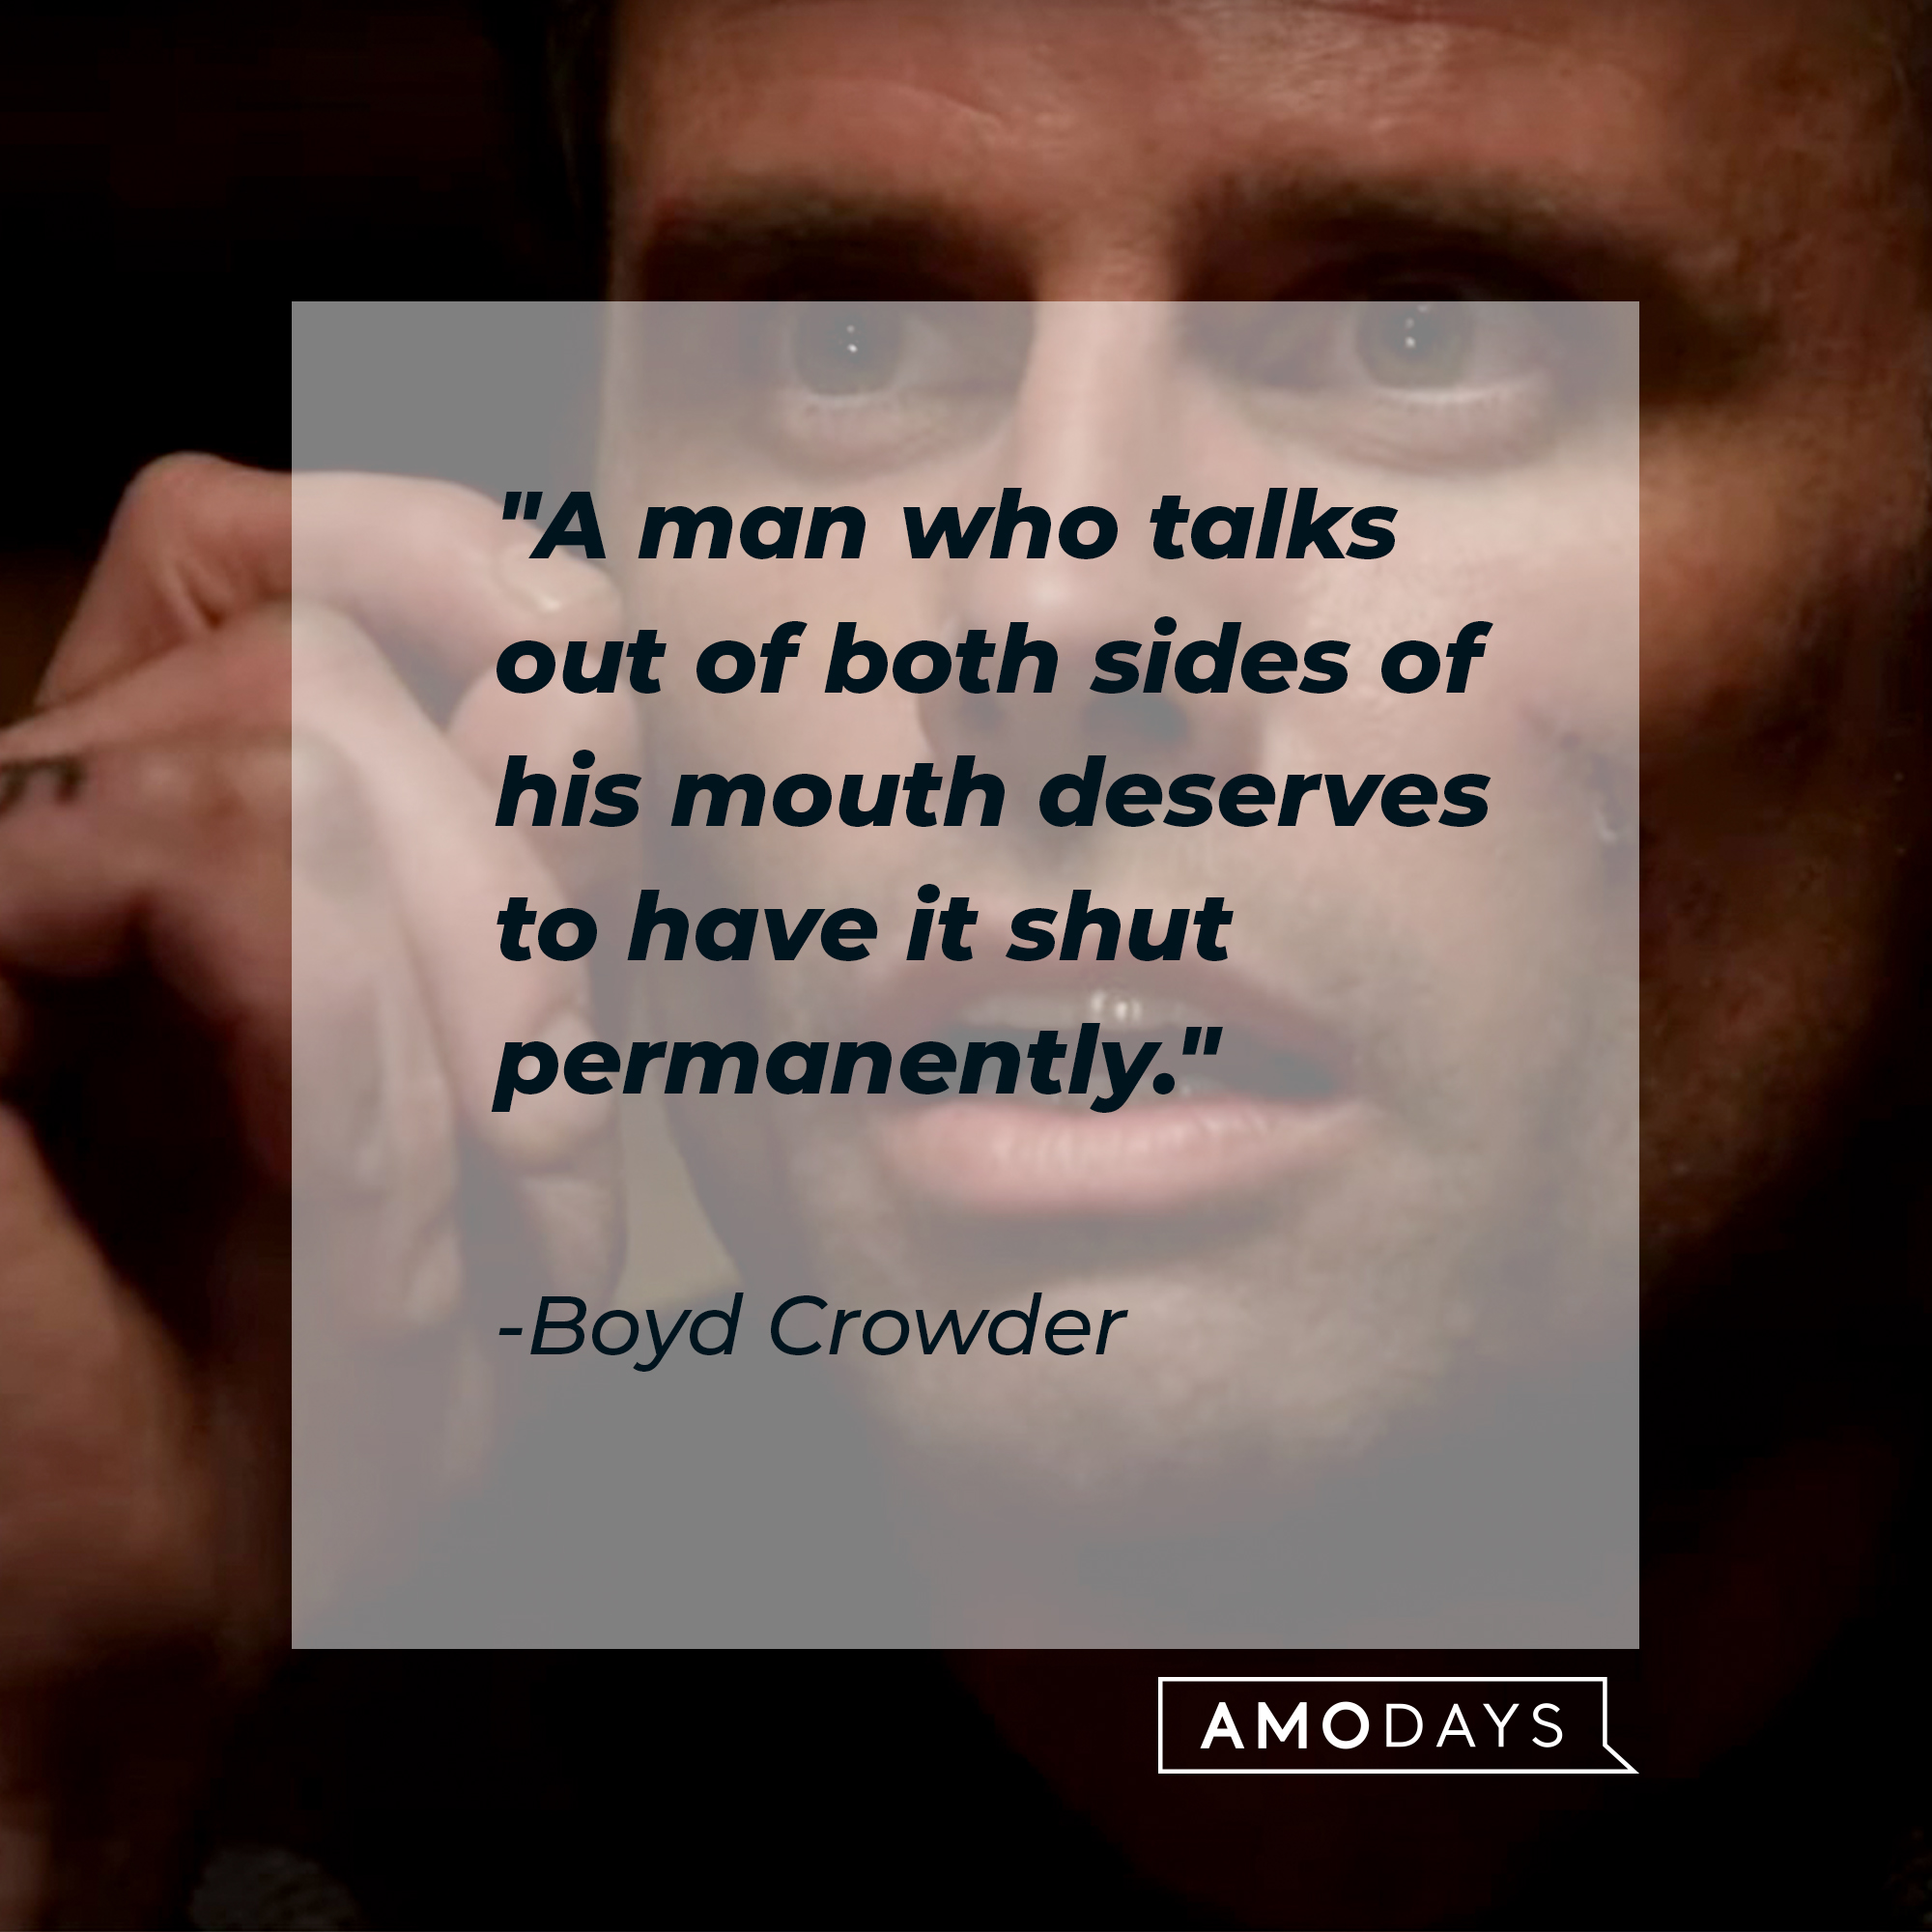 An image of Boyd Crowder with his quote: "A man who talks out of both sides of his mouth deserves to have it shut permanently." | Source: youtube.com/FXNetworks